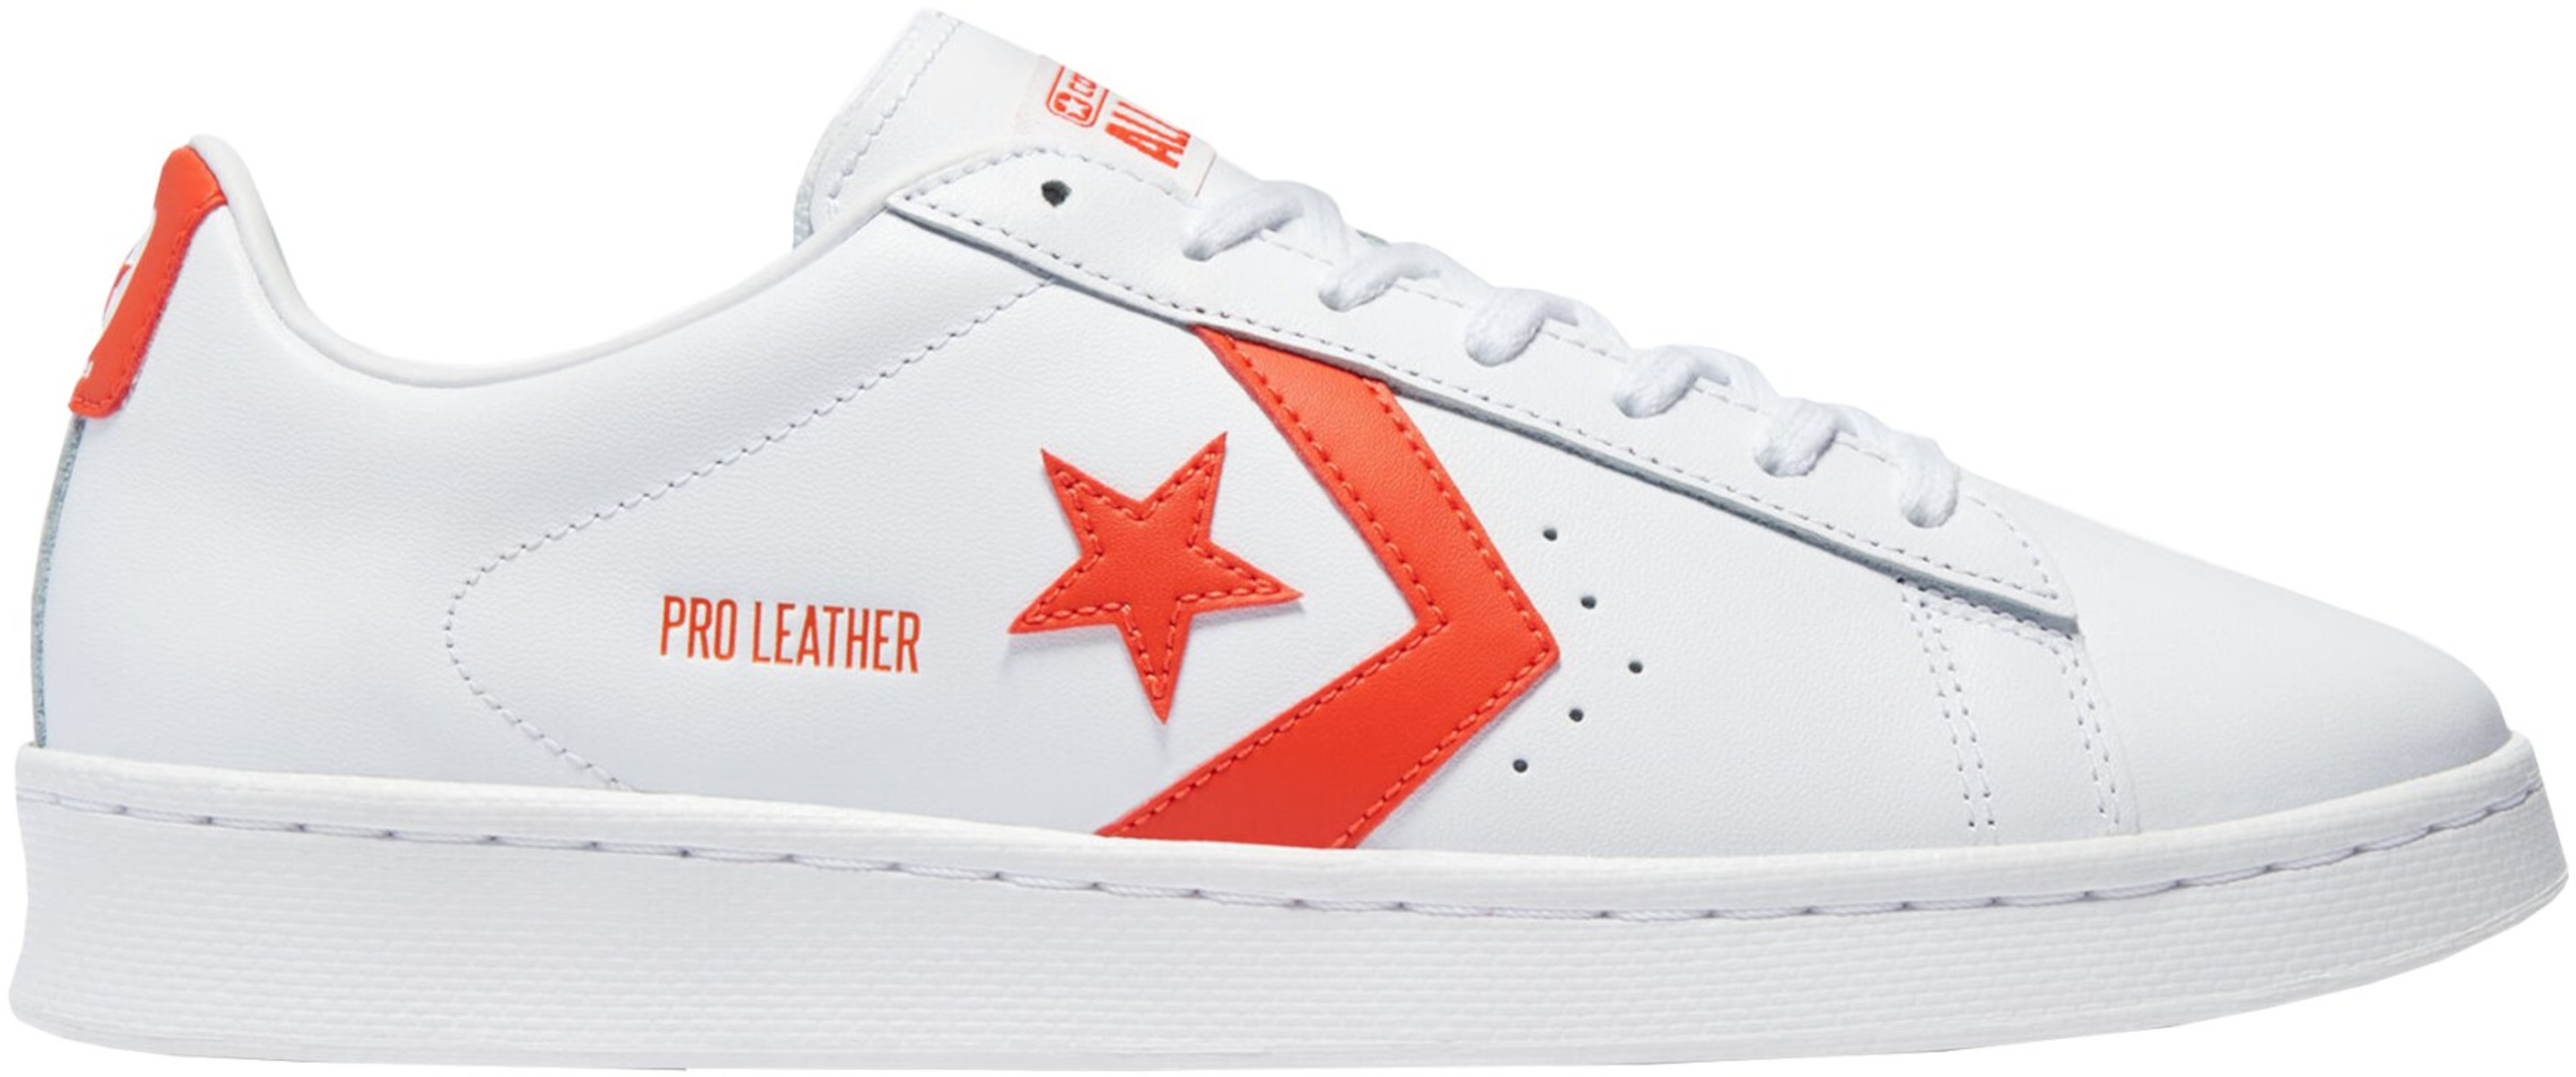 Shoes Converse Pro Leather Weiss Orange F968